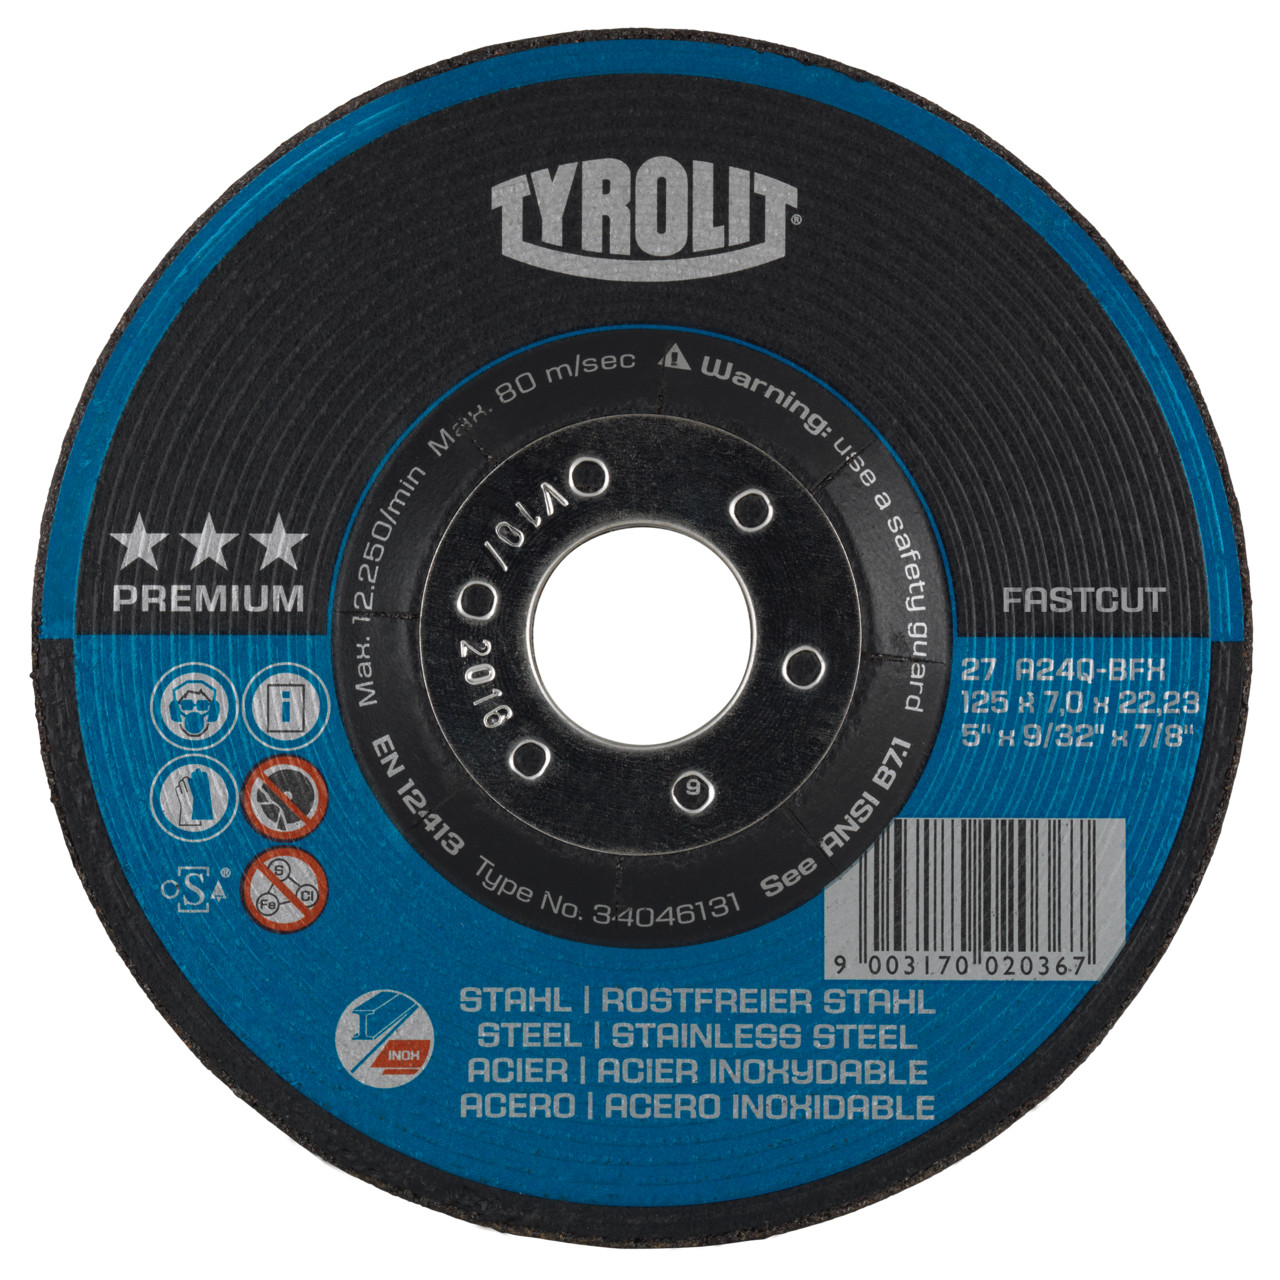 Tyrolit Roughing disc DxUxH 178x7x22.23 FASTCUT for steel and stainless steel, shape: 27 - offset version, Art. 1421